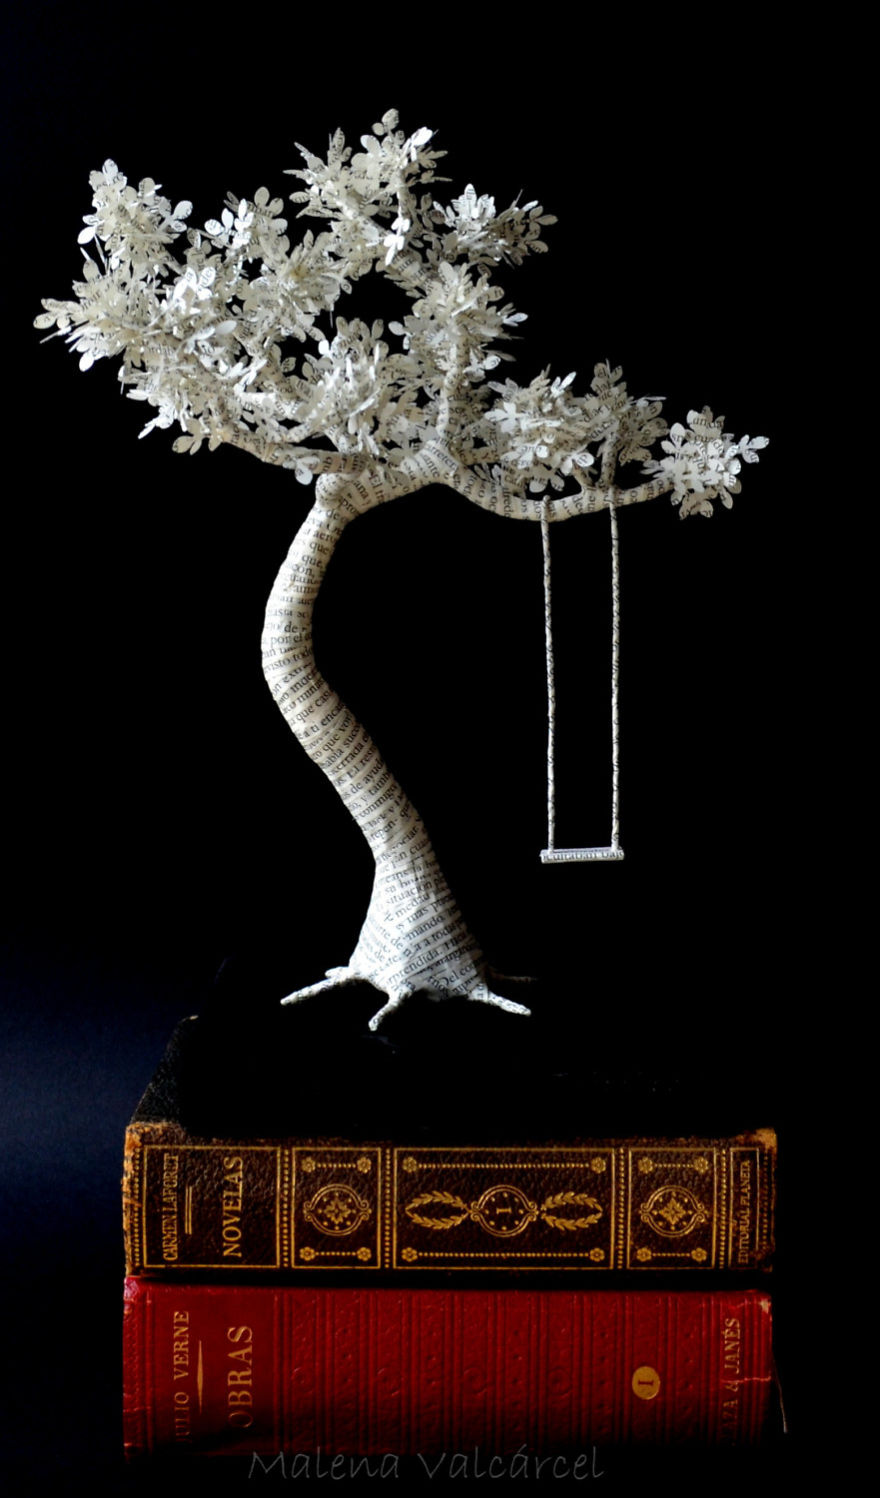 book-sculptures-are-my-passion-i-work-with-paper-to-create-elaborated-forms-57f36535c1450__880